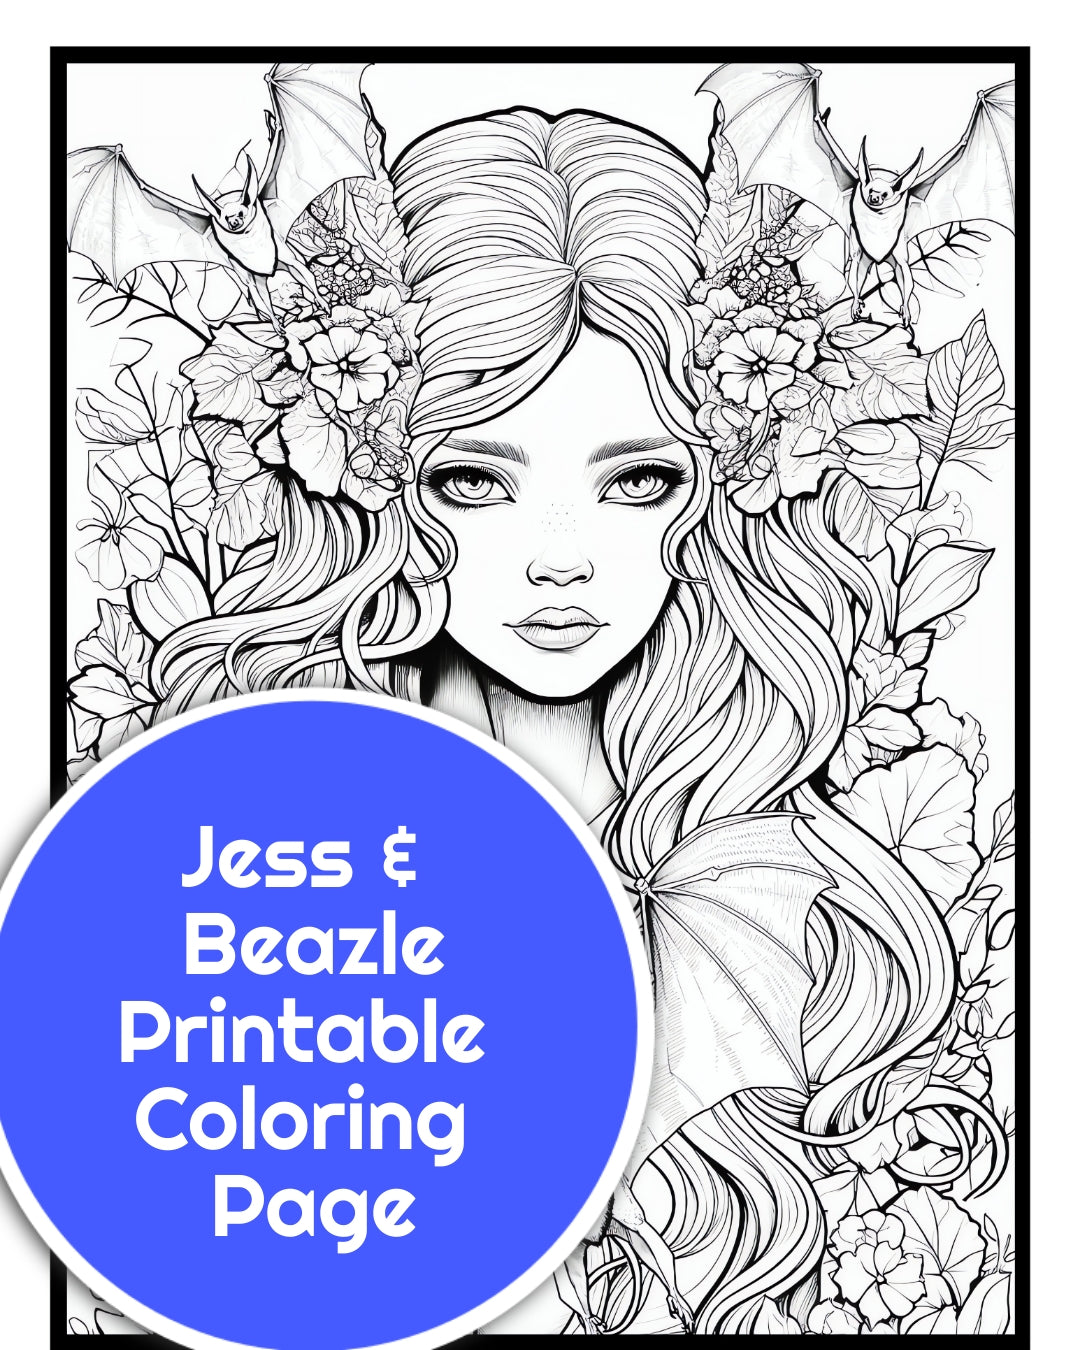 Jessamine printable coloring page